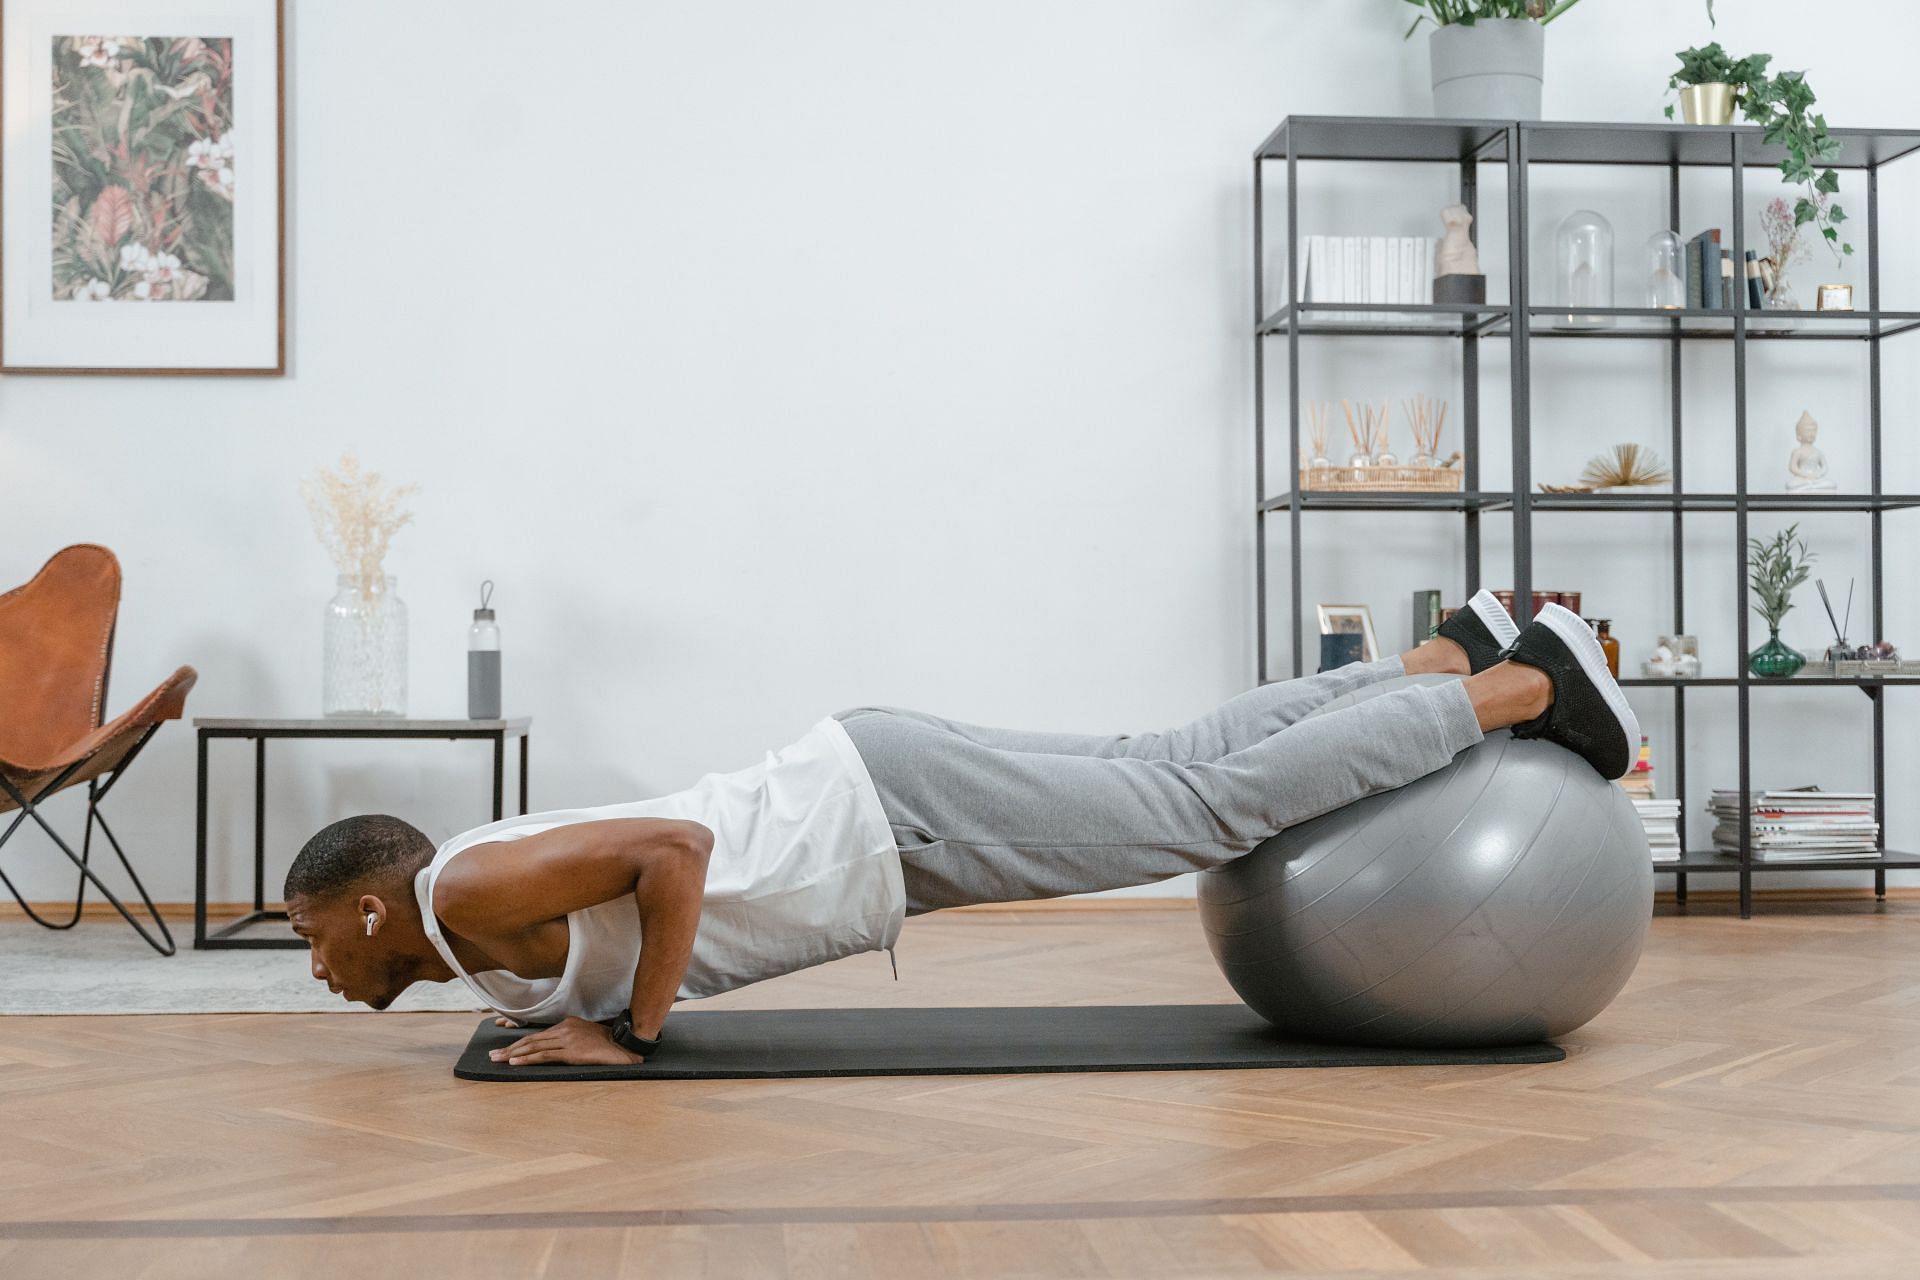 Plank on ball will help you tone your core and abdomen (Image via Pexels/Mart Production)